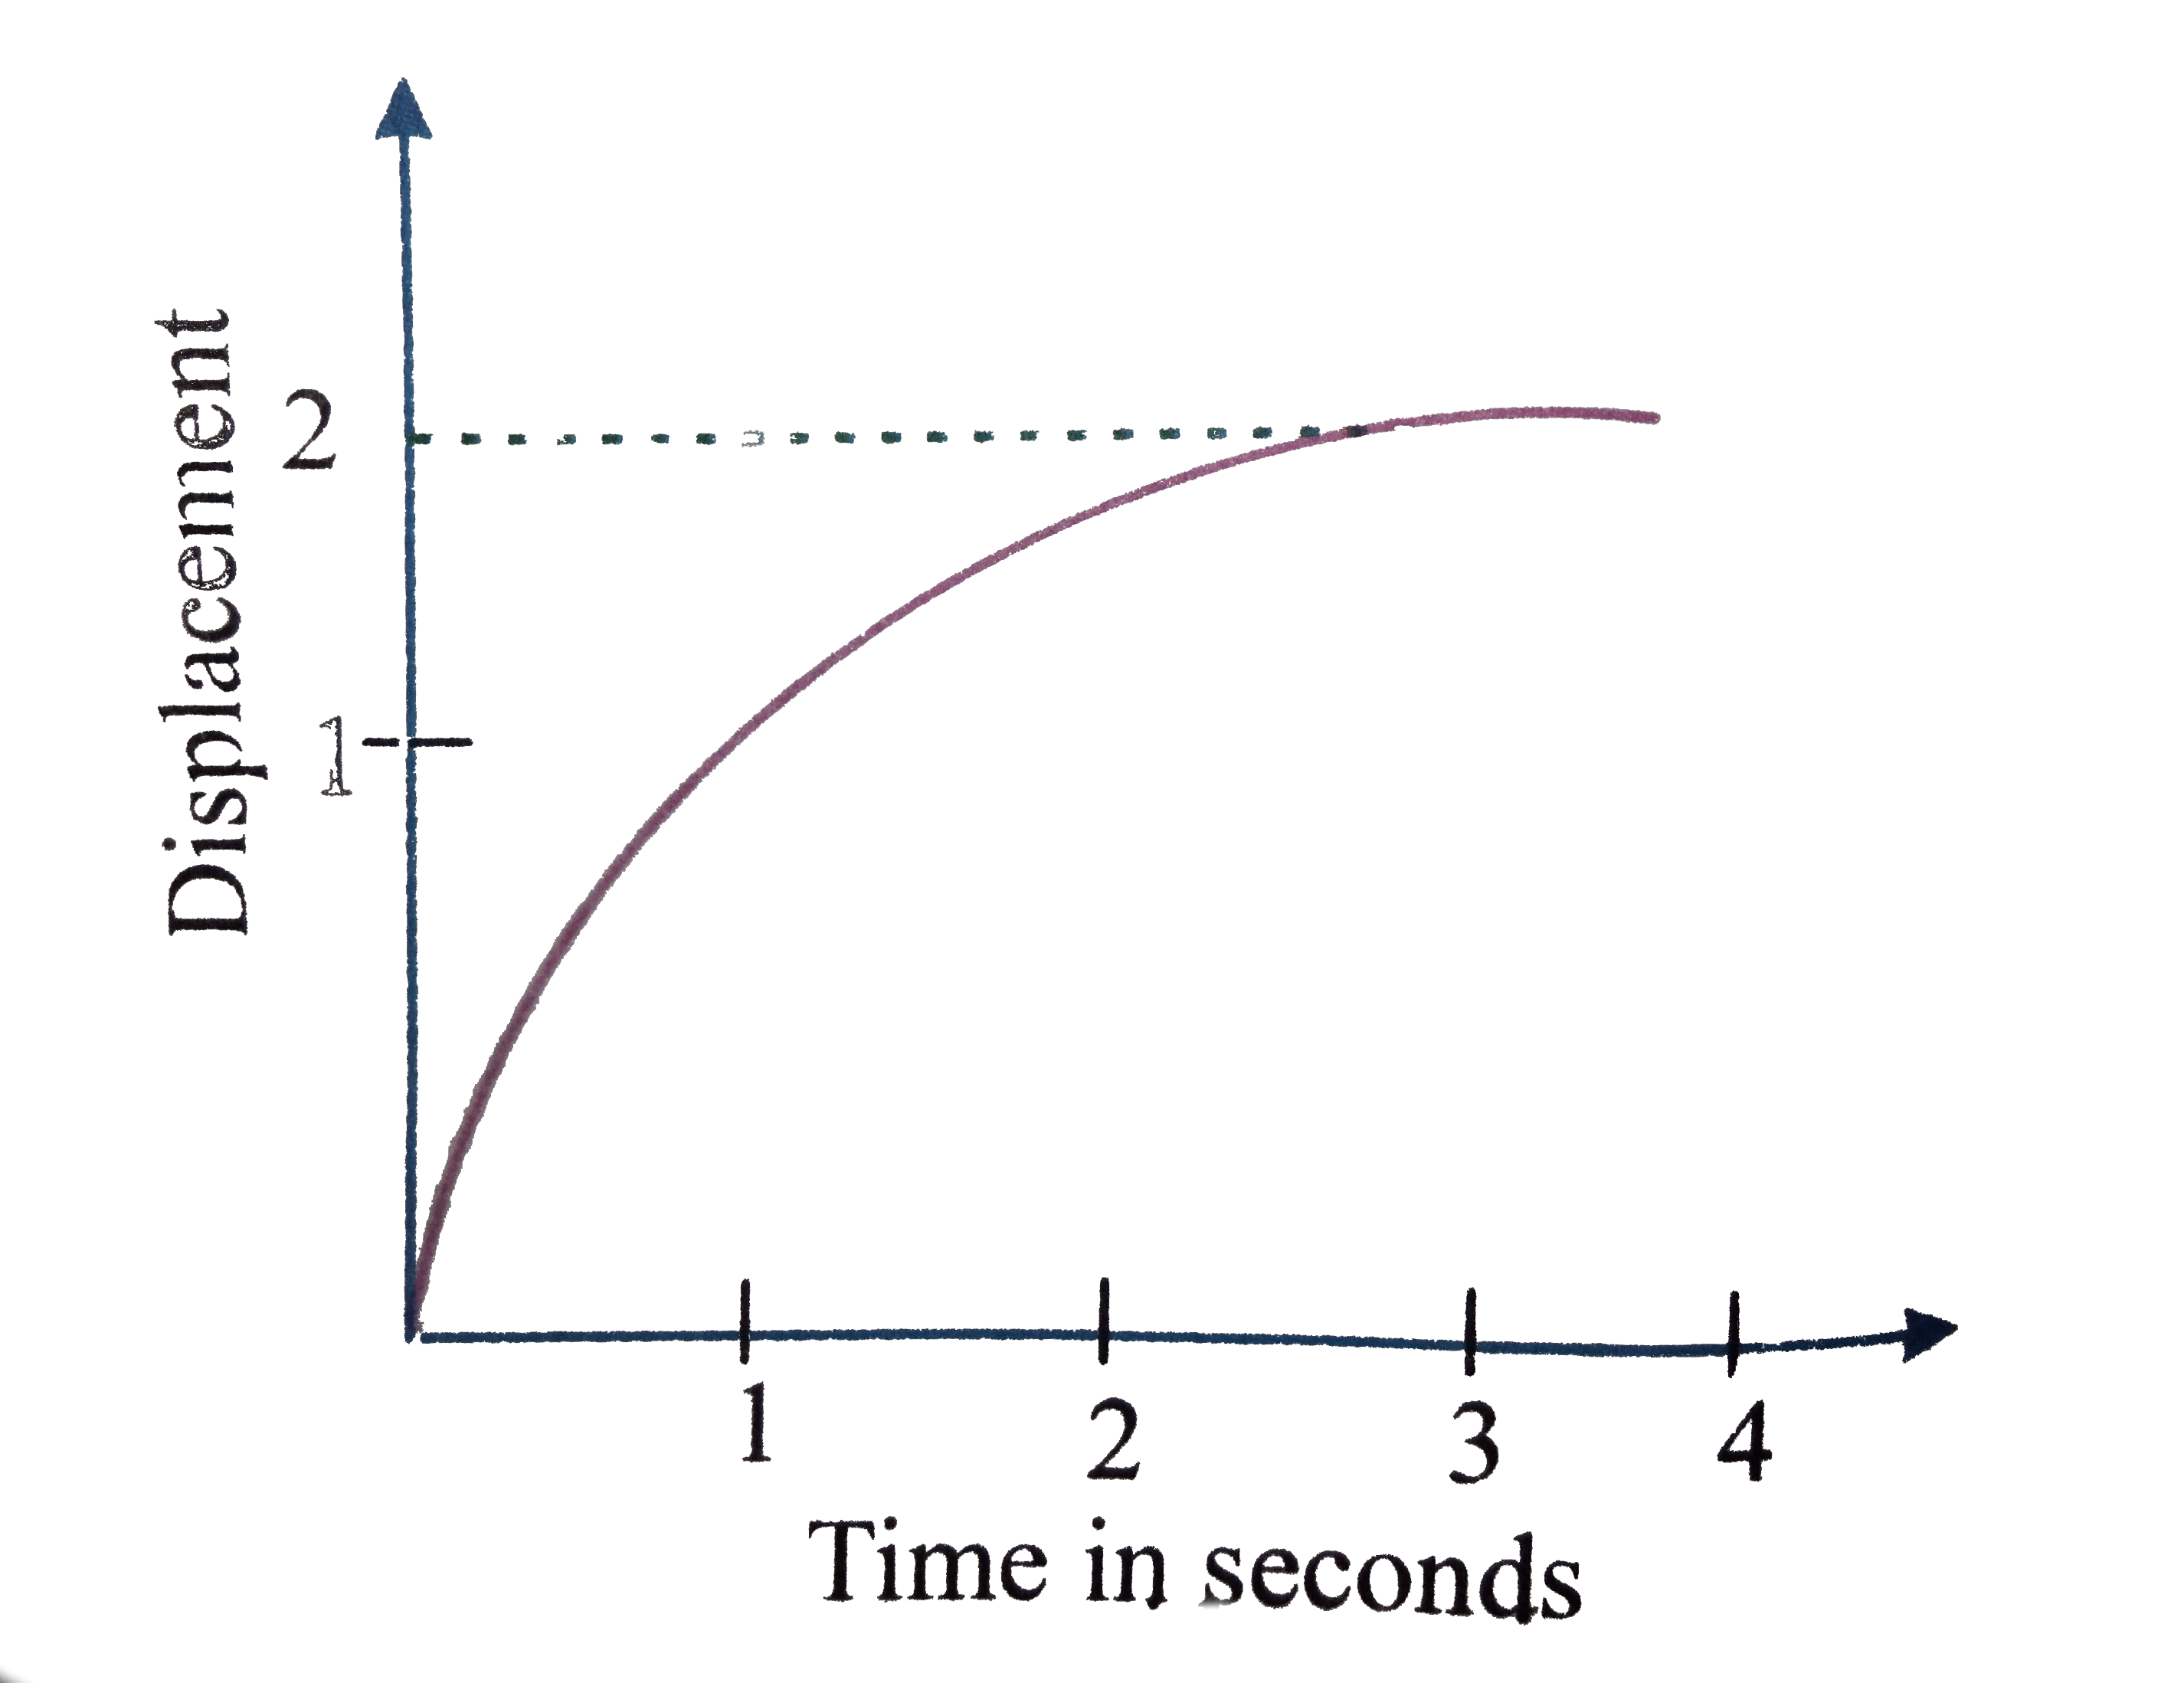 The displacement of a particle as a funtion of time is shown in the figure. The figure shows that